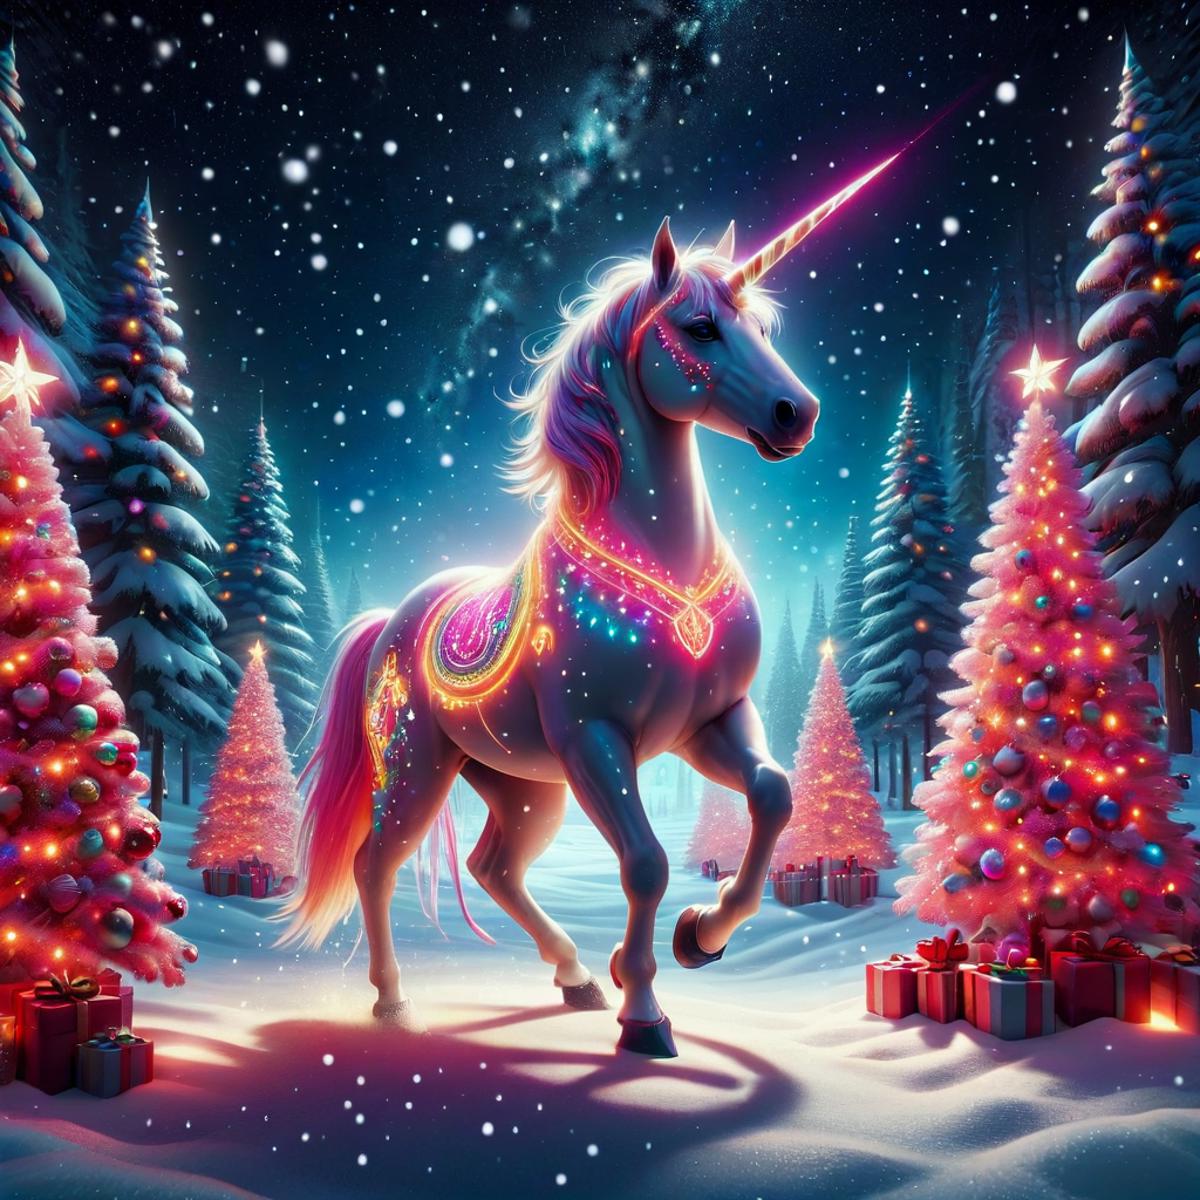 A magical scene of a unicorn walking through a snowy forest with colorful Christmas trees in the background.